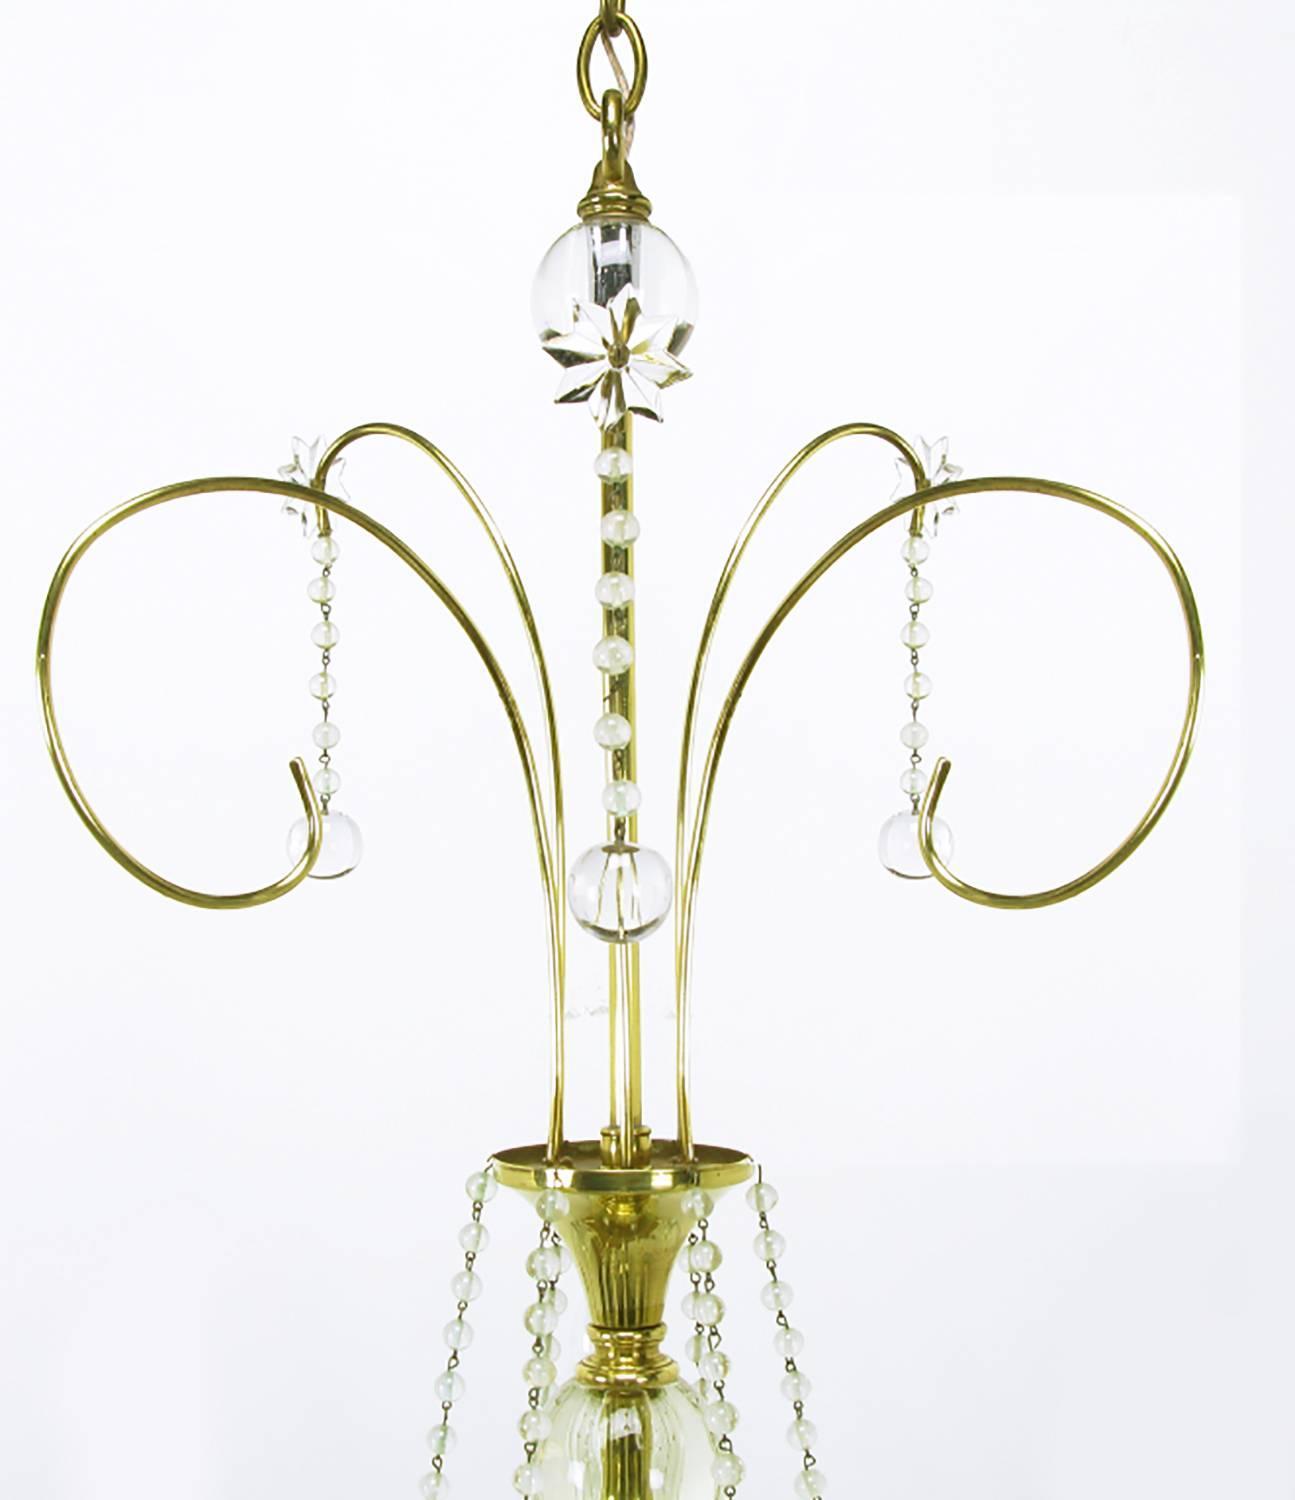 1940s Rock Crystal Spheres and Brass Chandelier For Sale at 1stdibs